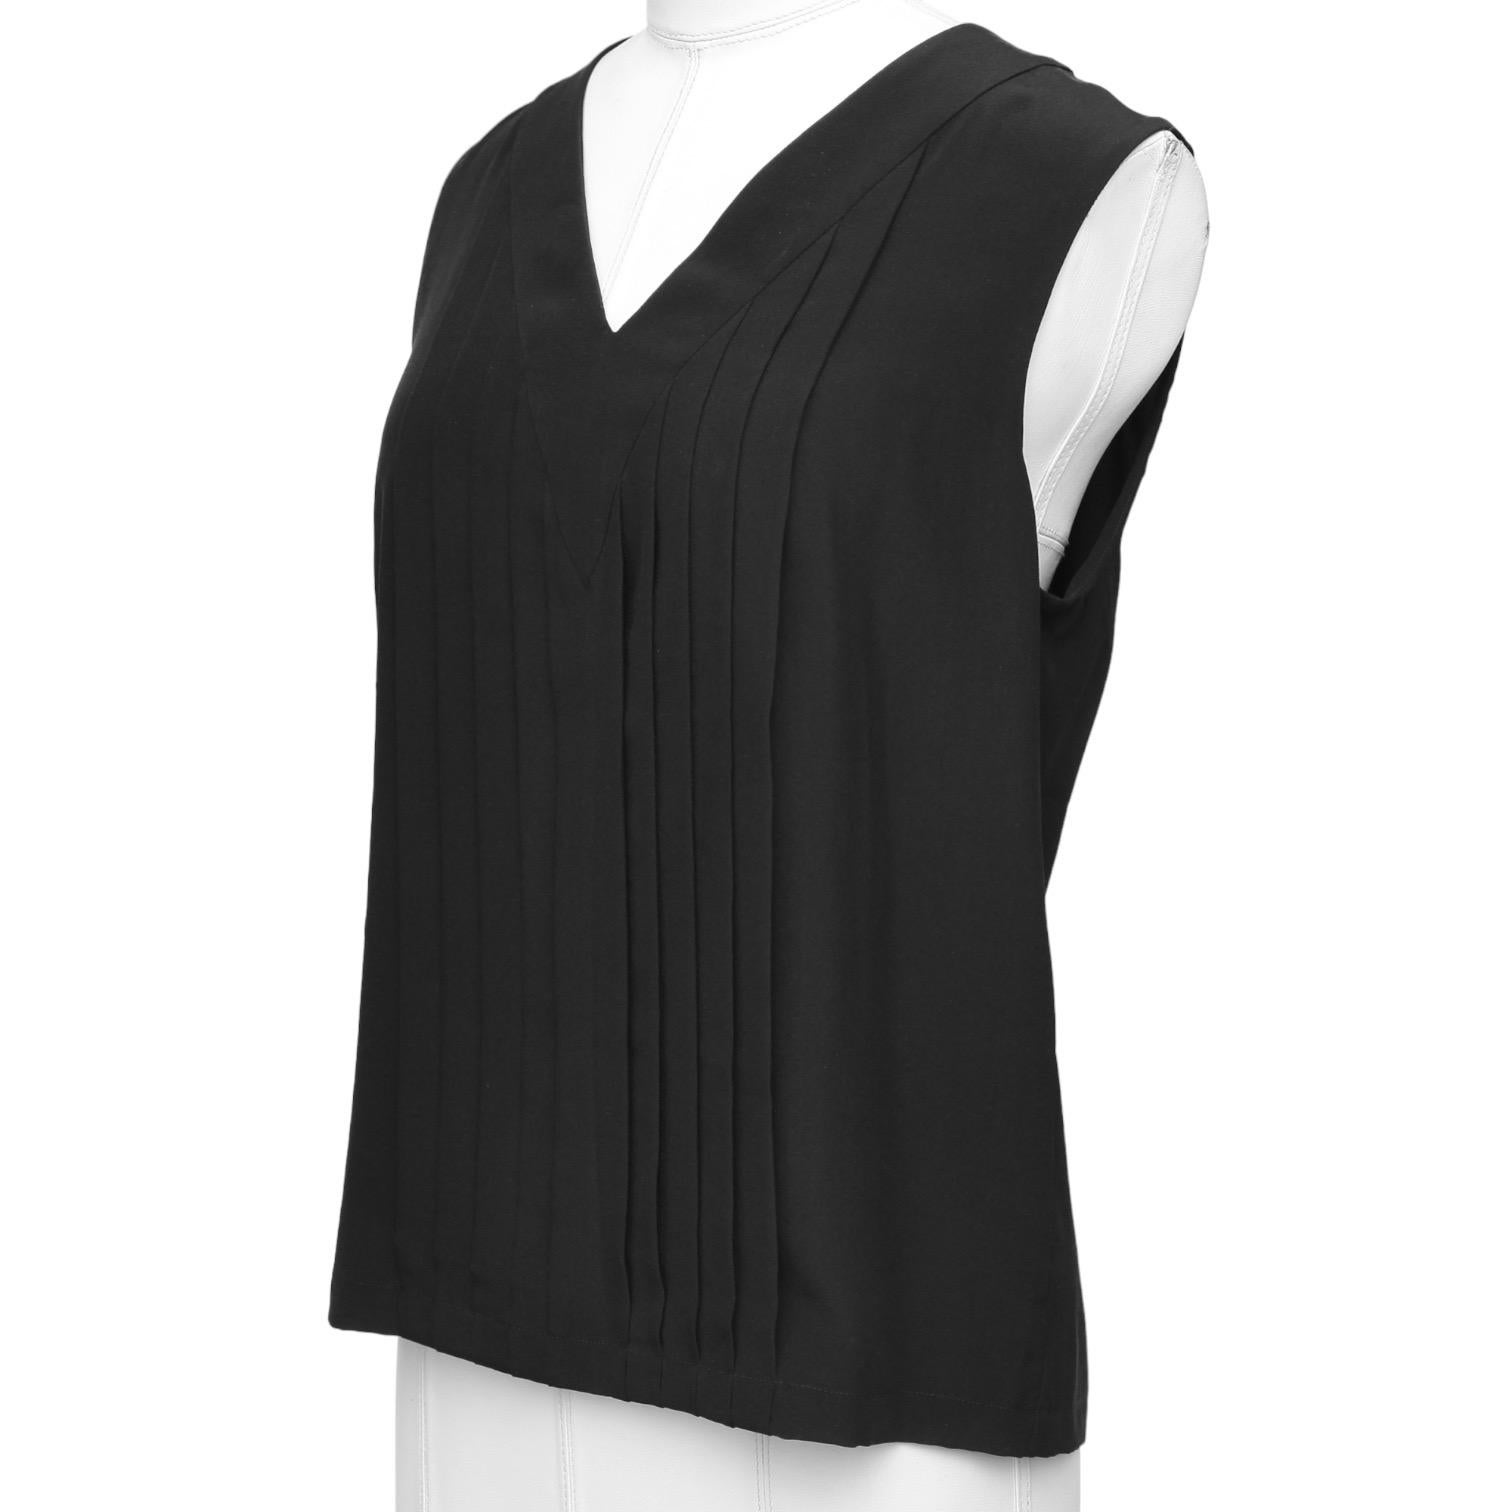 CHANEL Black Silk Blouse Sleeveless Top Shirt Pleats V-Neck Buttons Sz 36 In Excellent Condition For Sale In Hollywood, FL